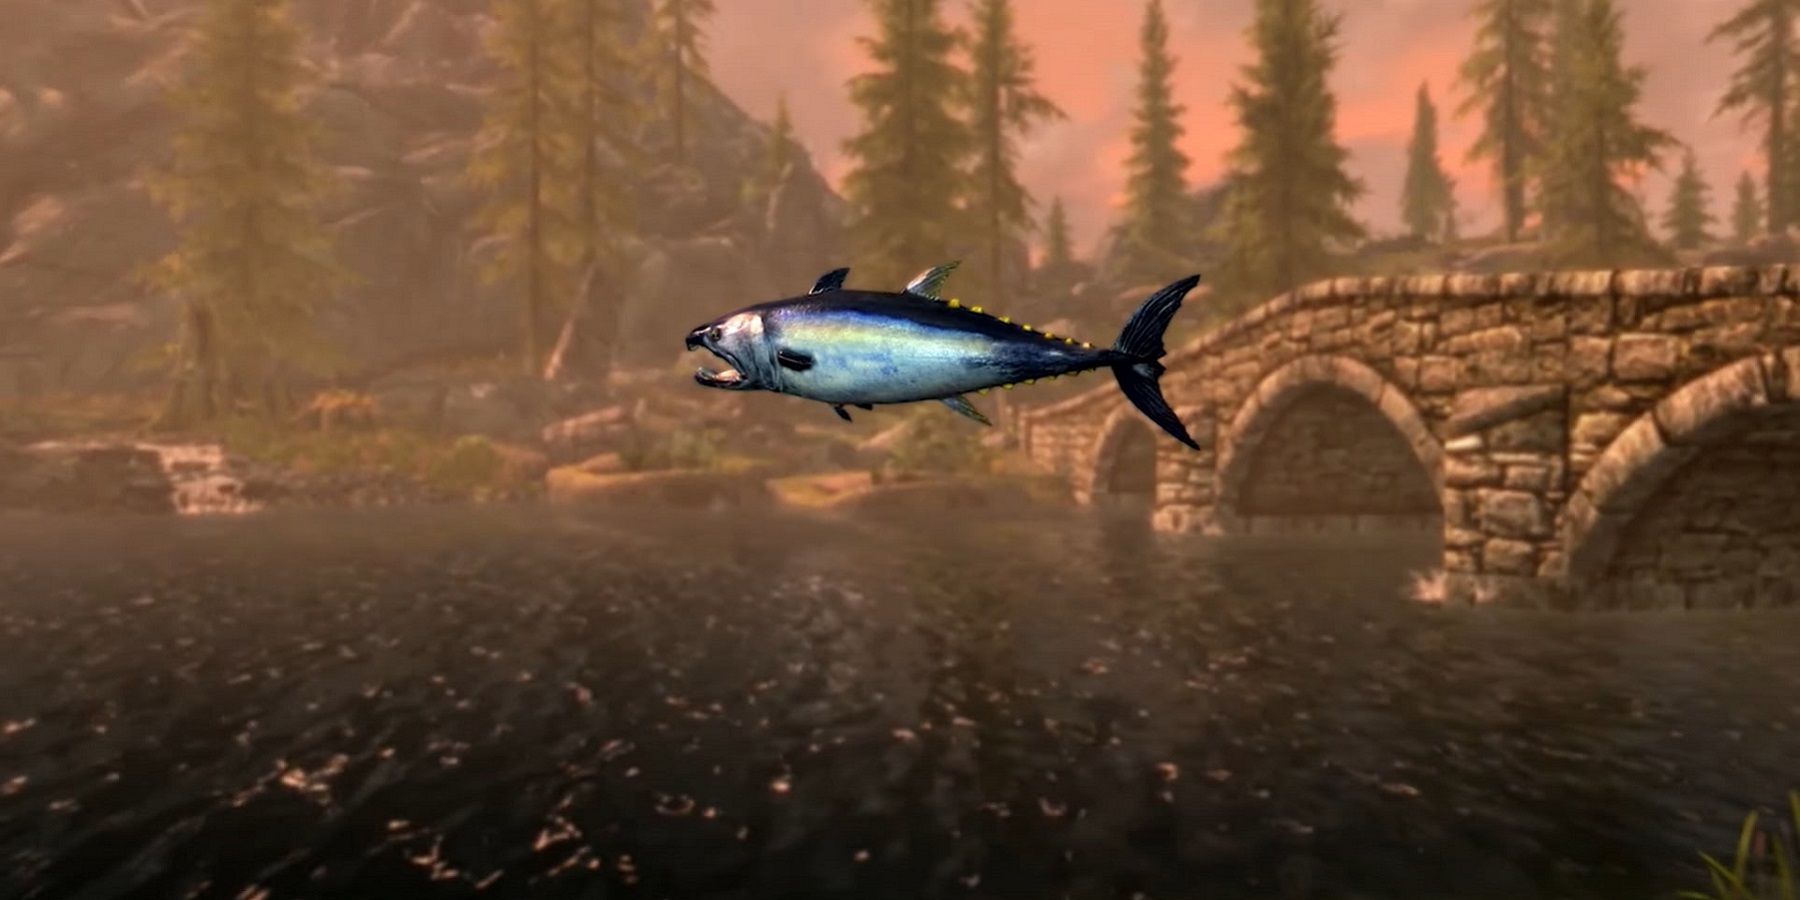 Can you beat Skyrim with only a fishing rod? 